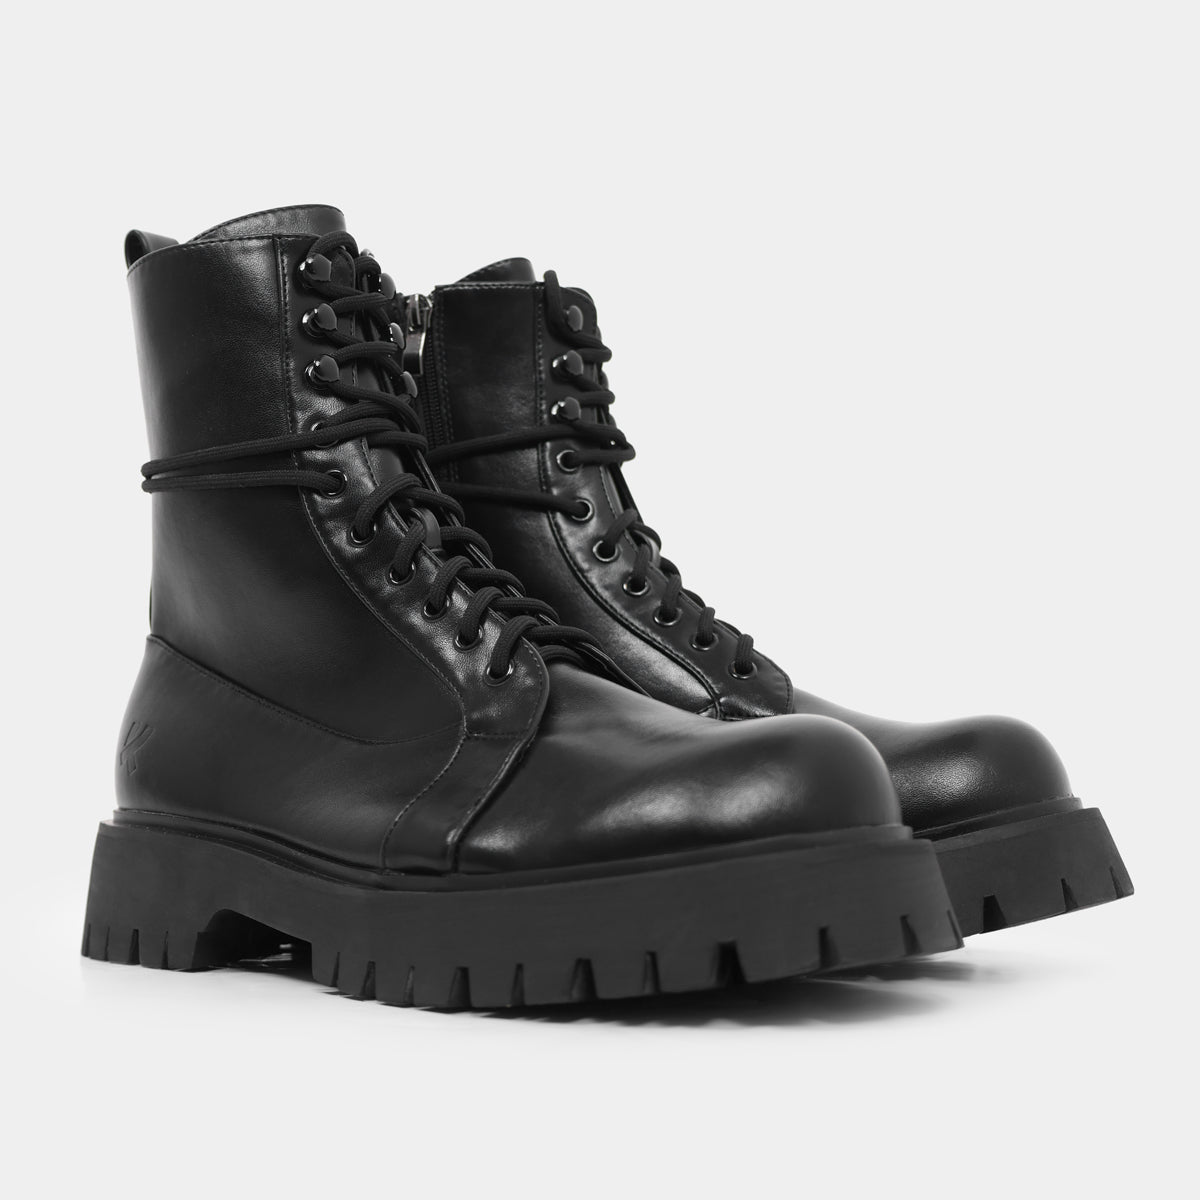 Electic Men's Military Boots - Ankle Boots - KOI Footwear - Black - Three-Quarter View